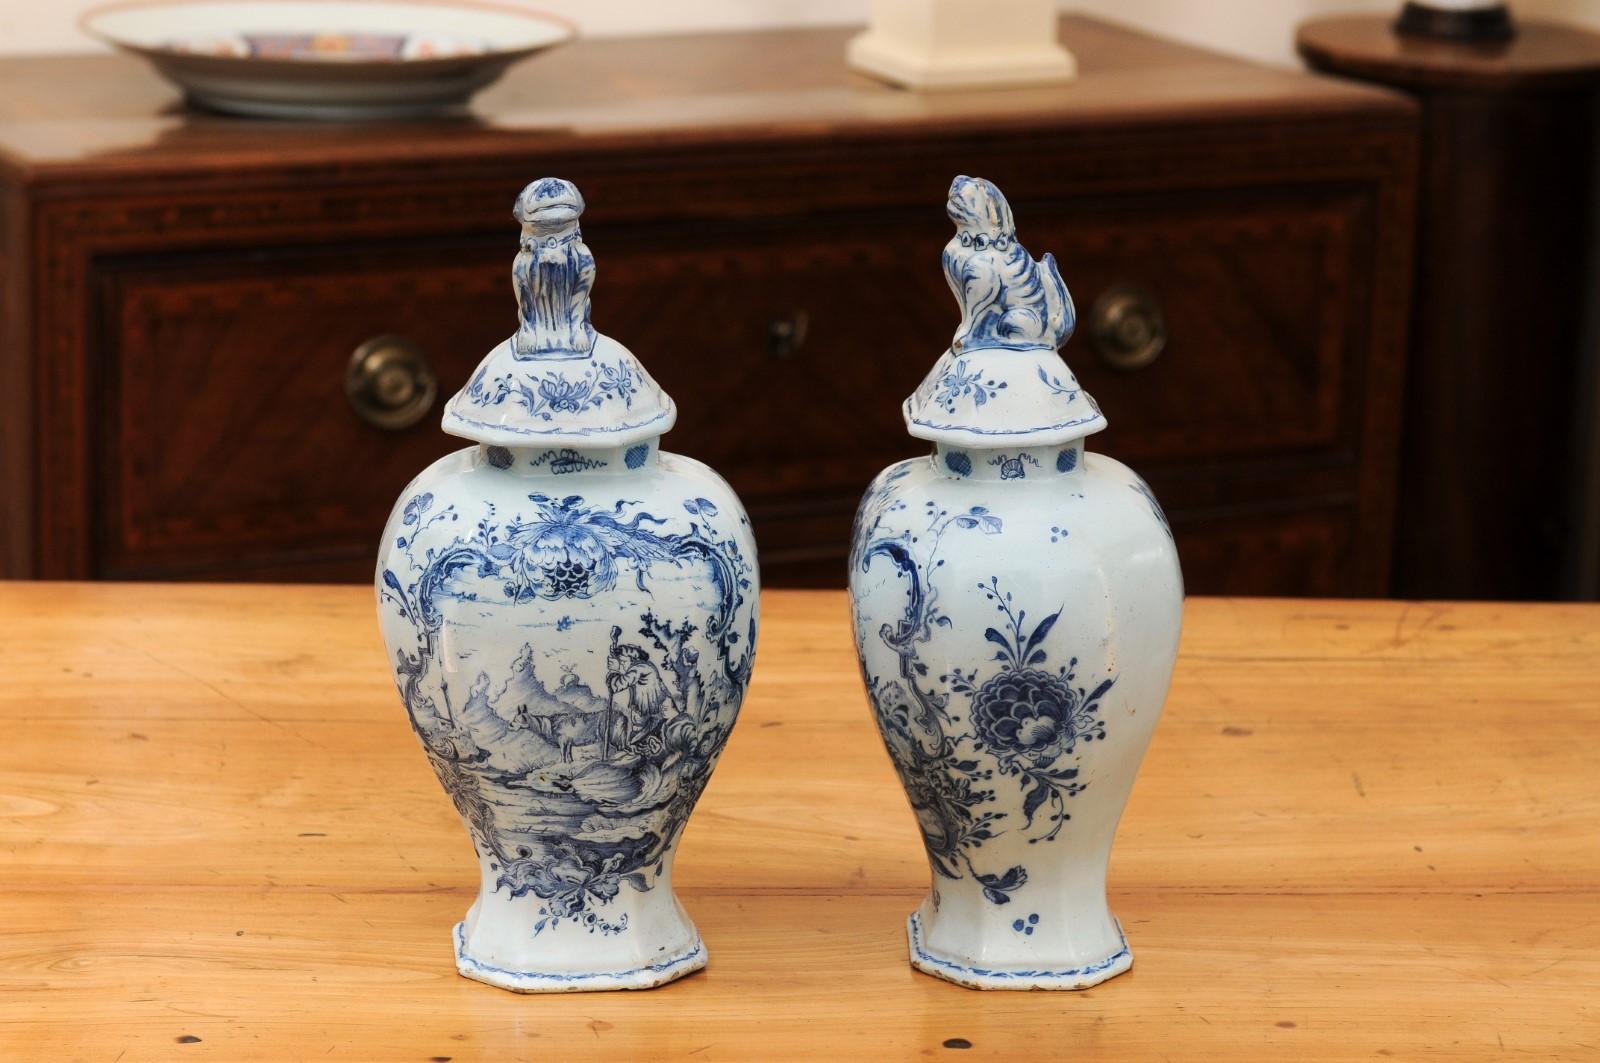 Pair of Late 18th Century Italian Porcelain Garniture Urns with Lids For Sale 10